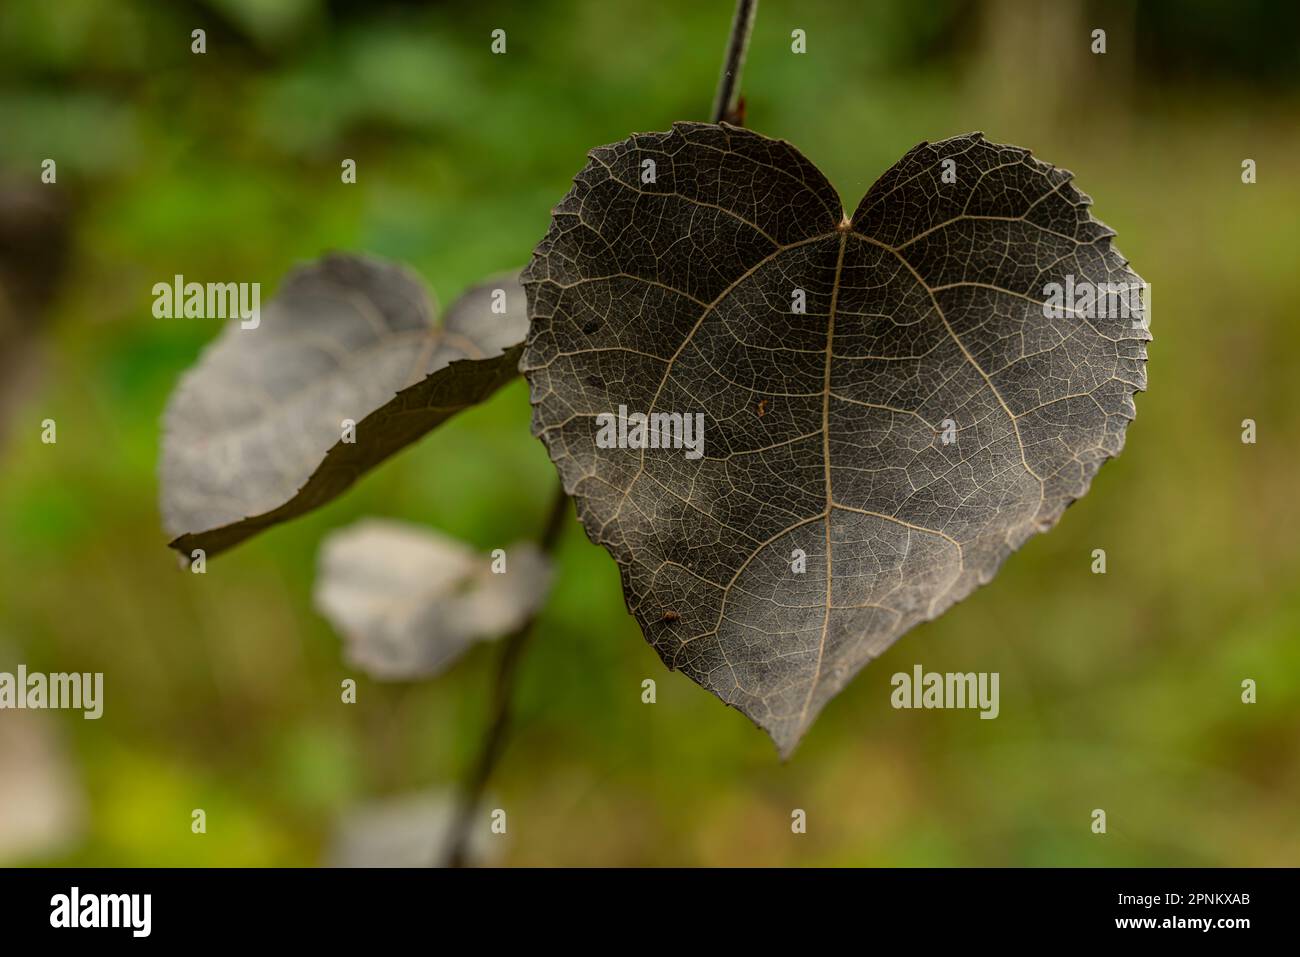 Unknown plant with beautiful black, heart-shaped leaf, growing in a forest Stock Photo